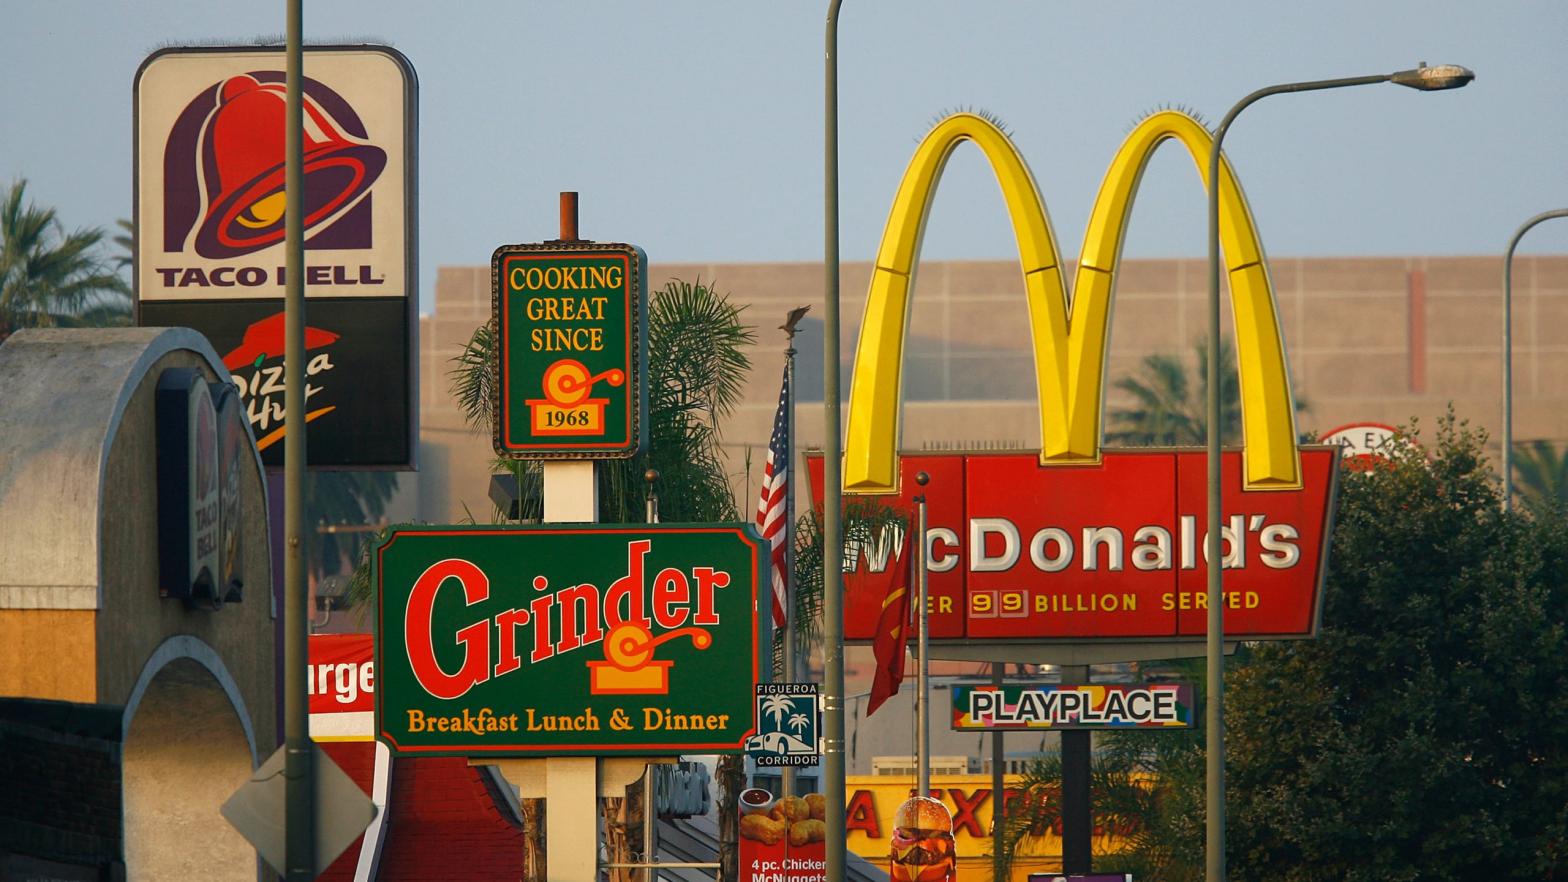 Signs for Taco Bell, Grinder, McDonalds, Panda Express fast-food restaurant line the streets in the Figueroa Corridor area of South Los Angeles on July 24, 2008, Los Angeles, California.  (Photo: David McNew, Getty Images)